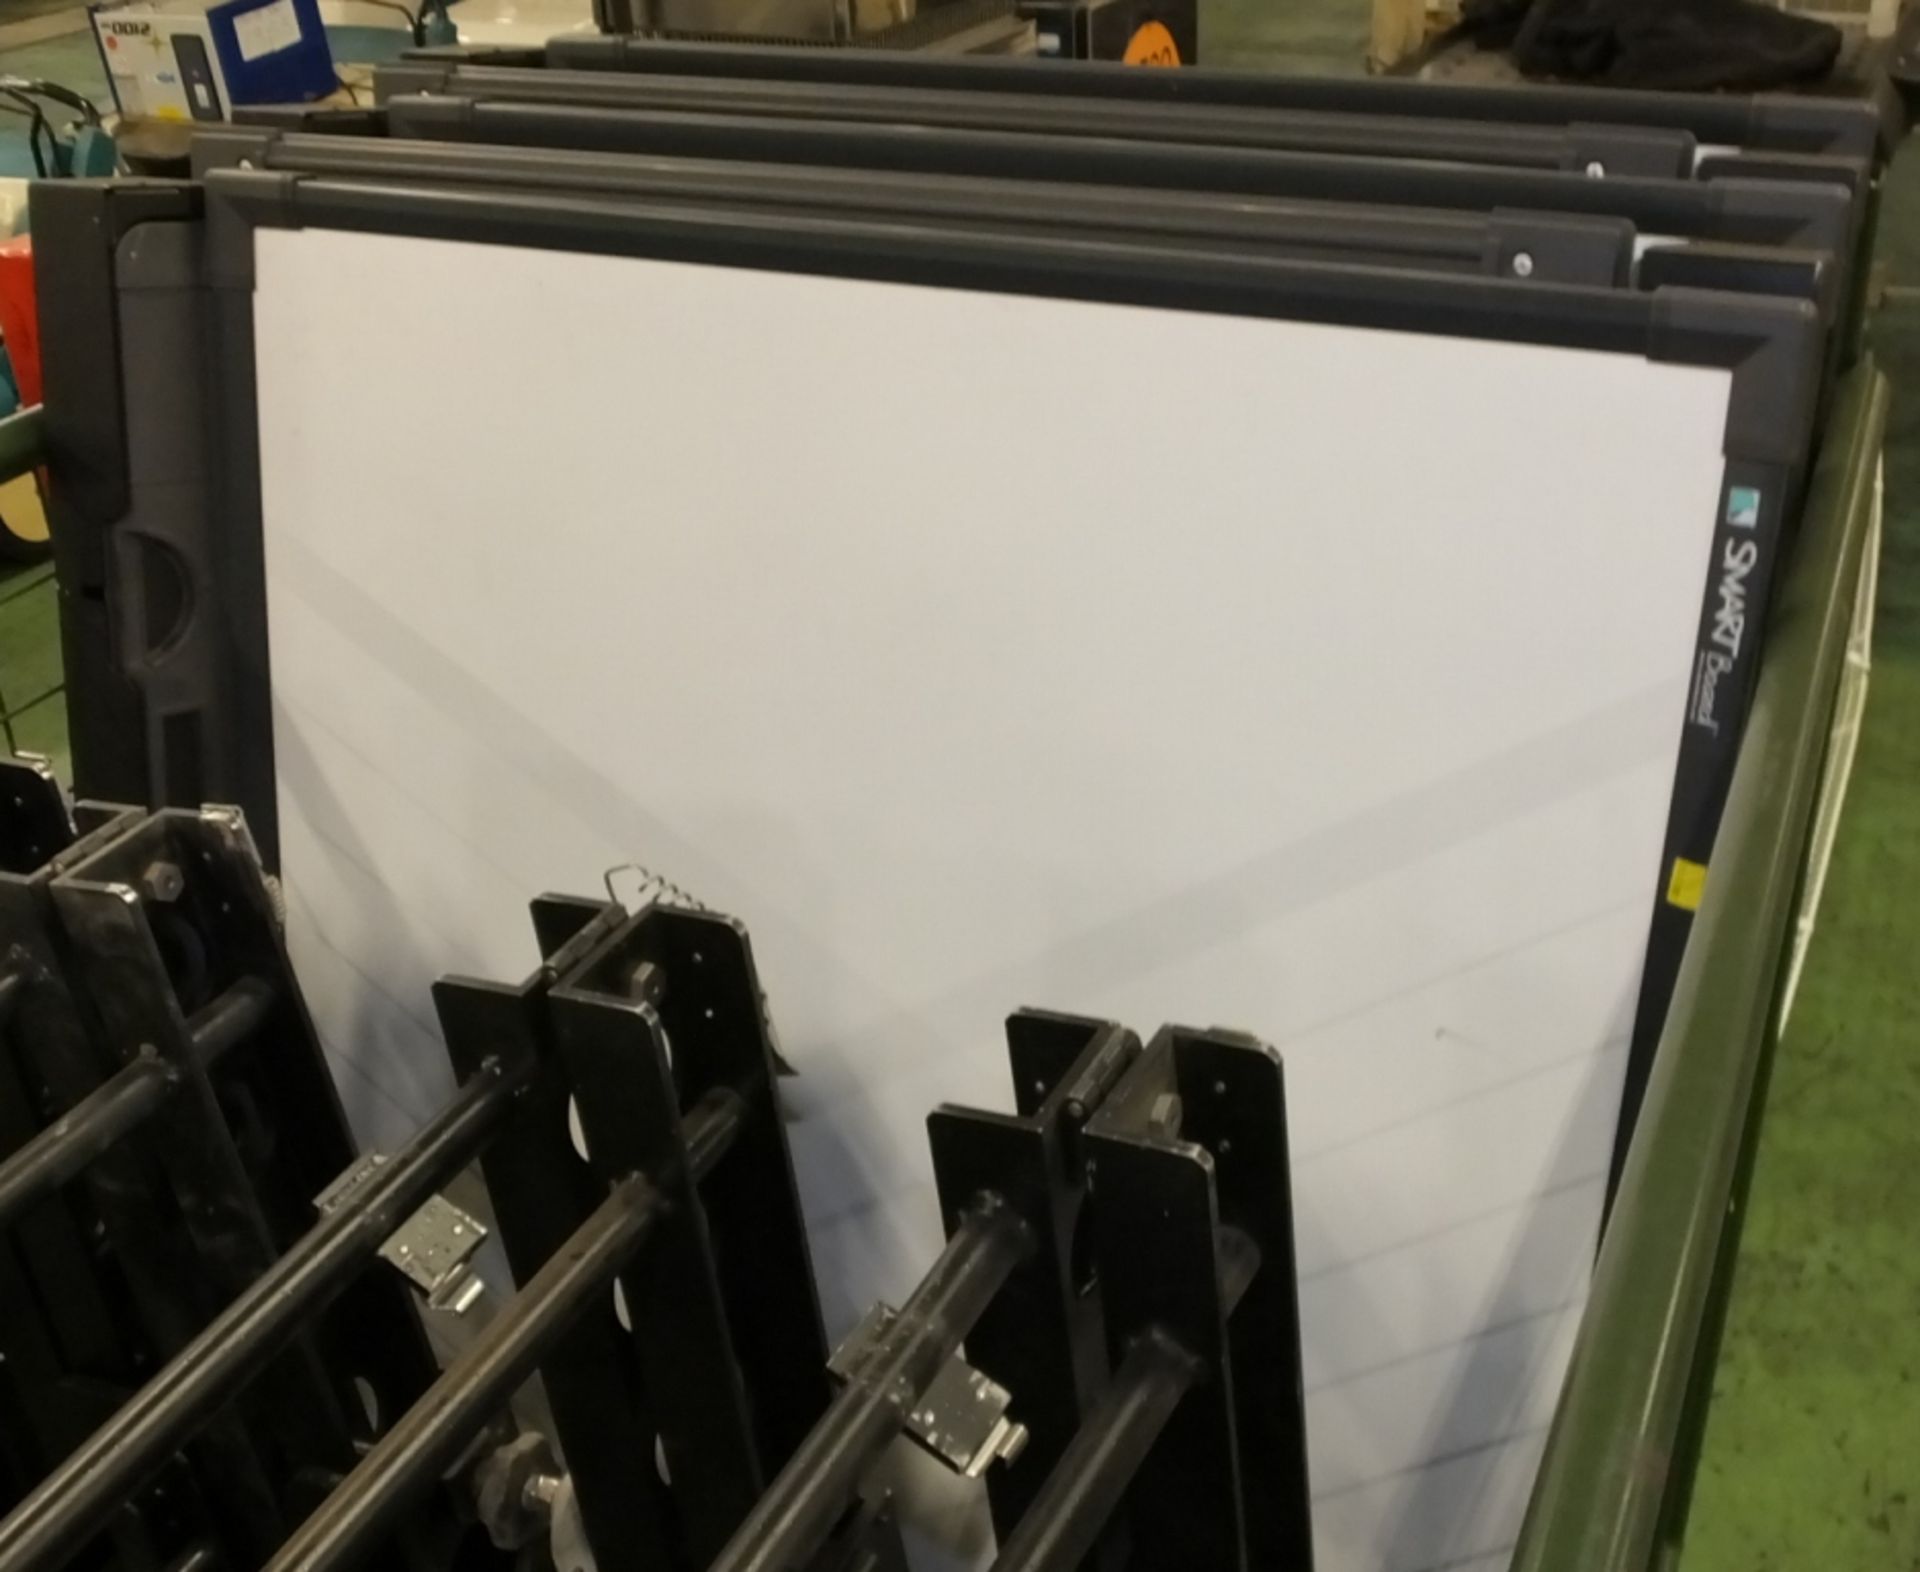 5x SmartBoard 5077305-02 Whiteboard Screens & Stands 50x42inch. - Image 2 of 3